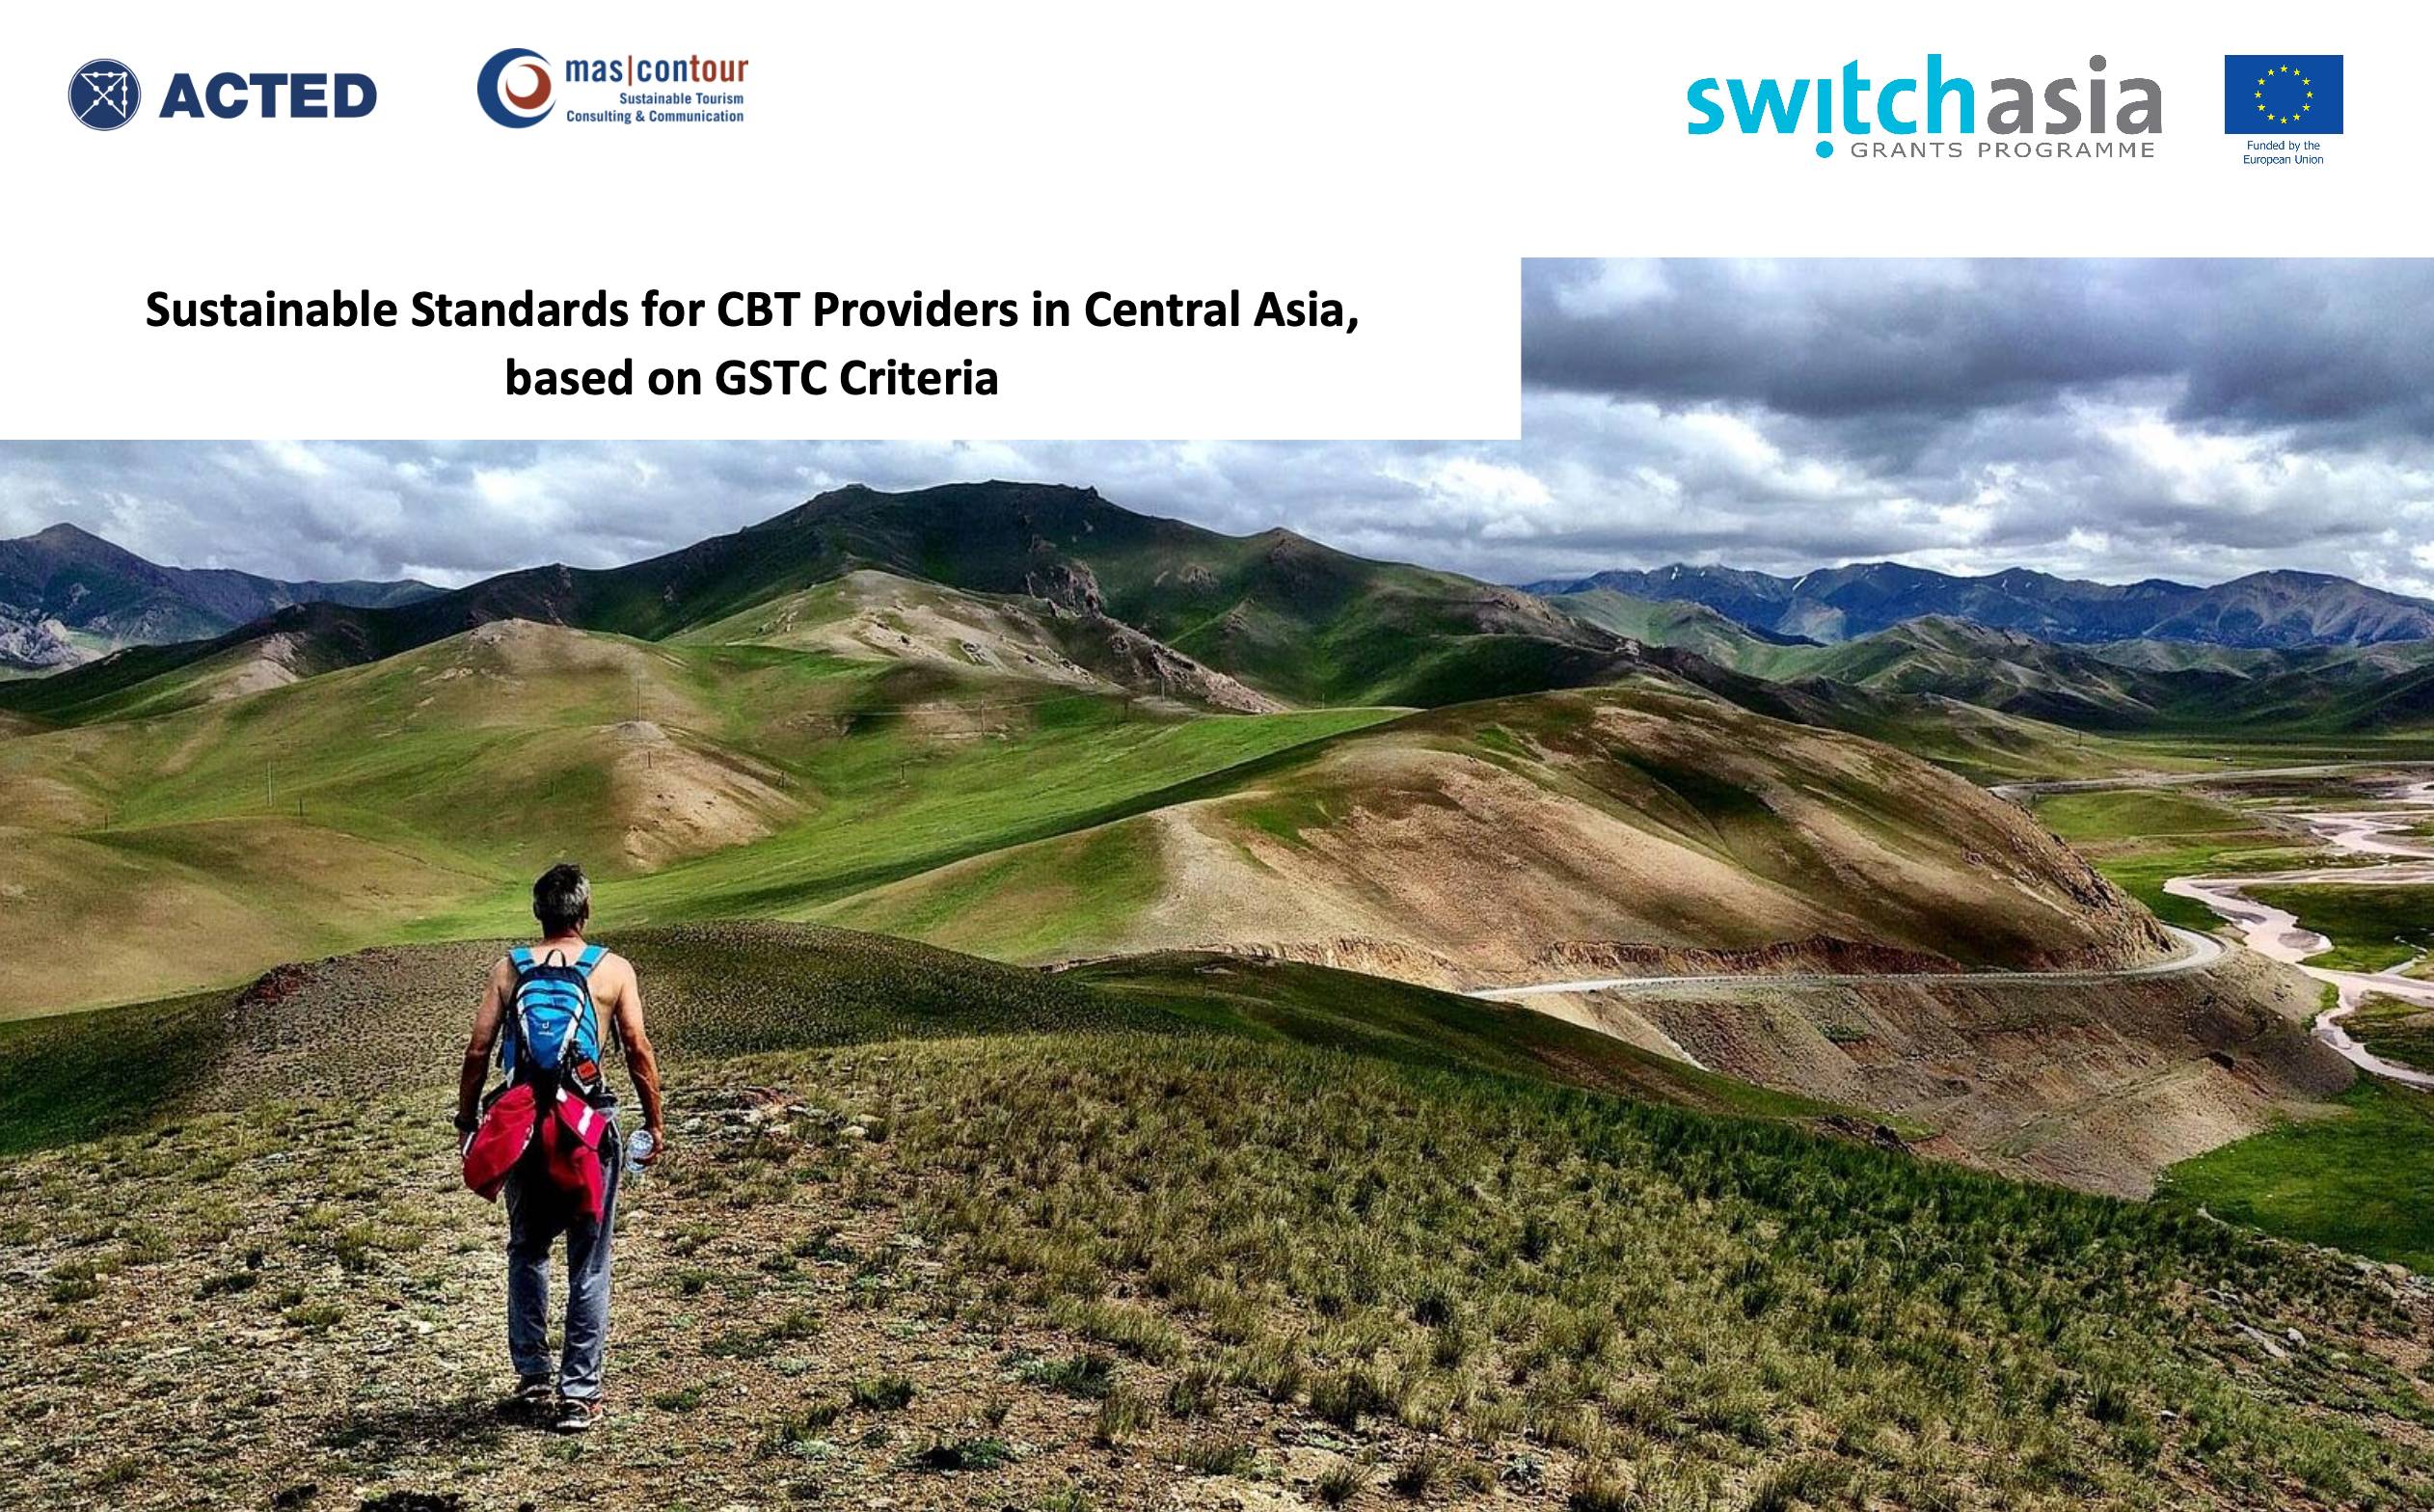 Sustainable Standards for CBT Providers in Central Asia, based on GSTC Criteria